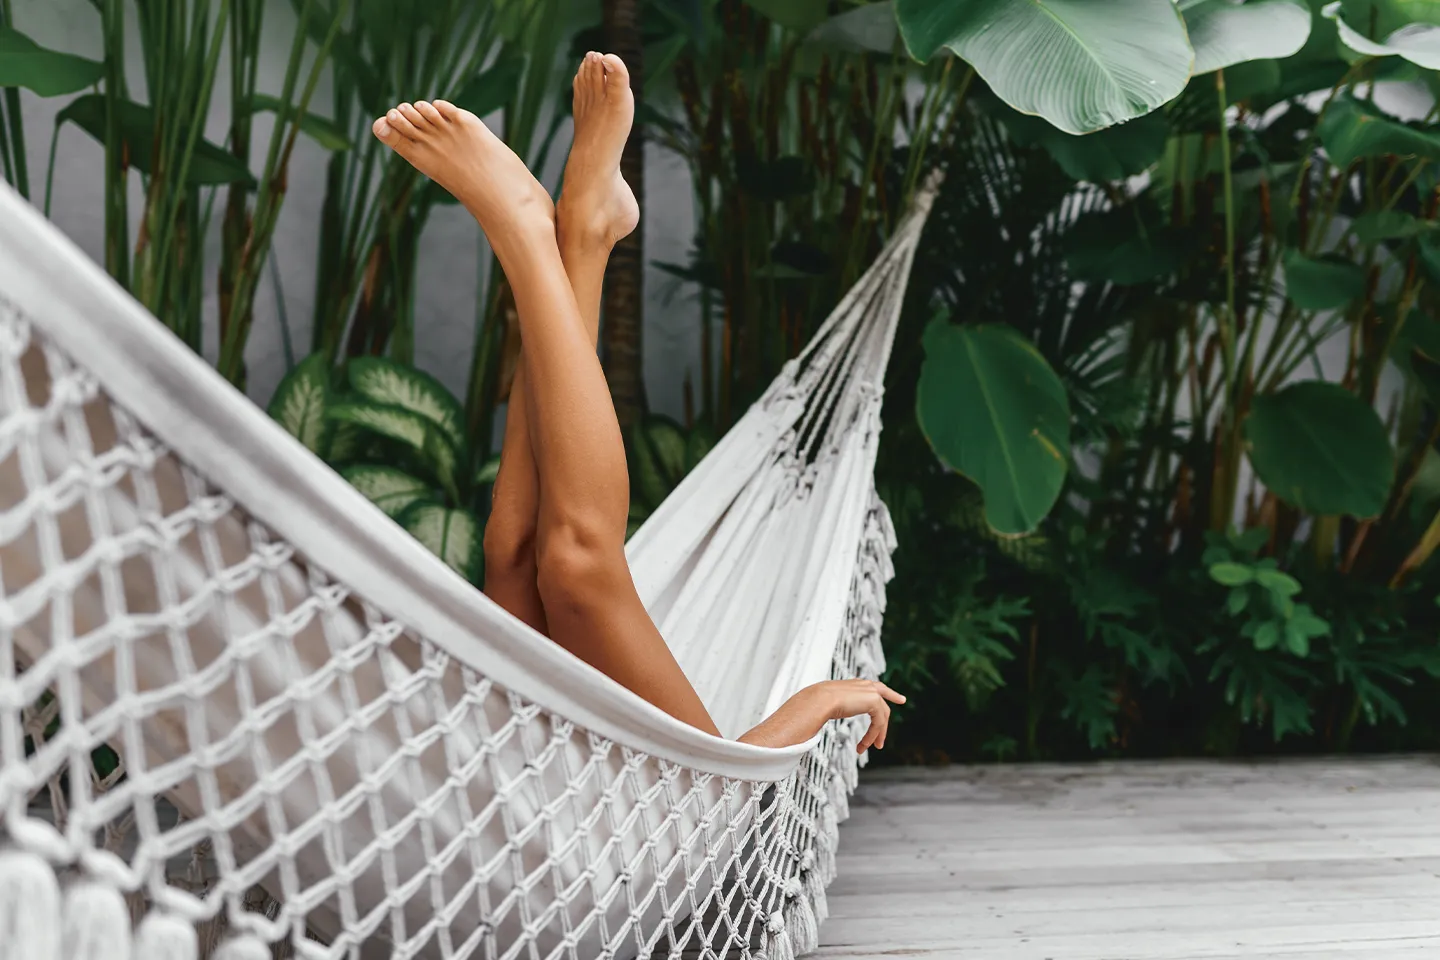 woman relaxes in hammock and stretches her legs upwards